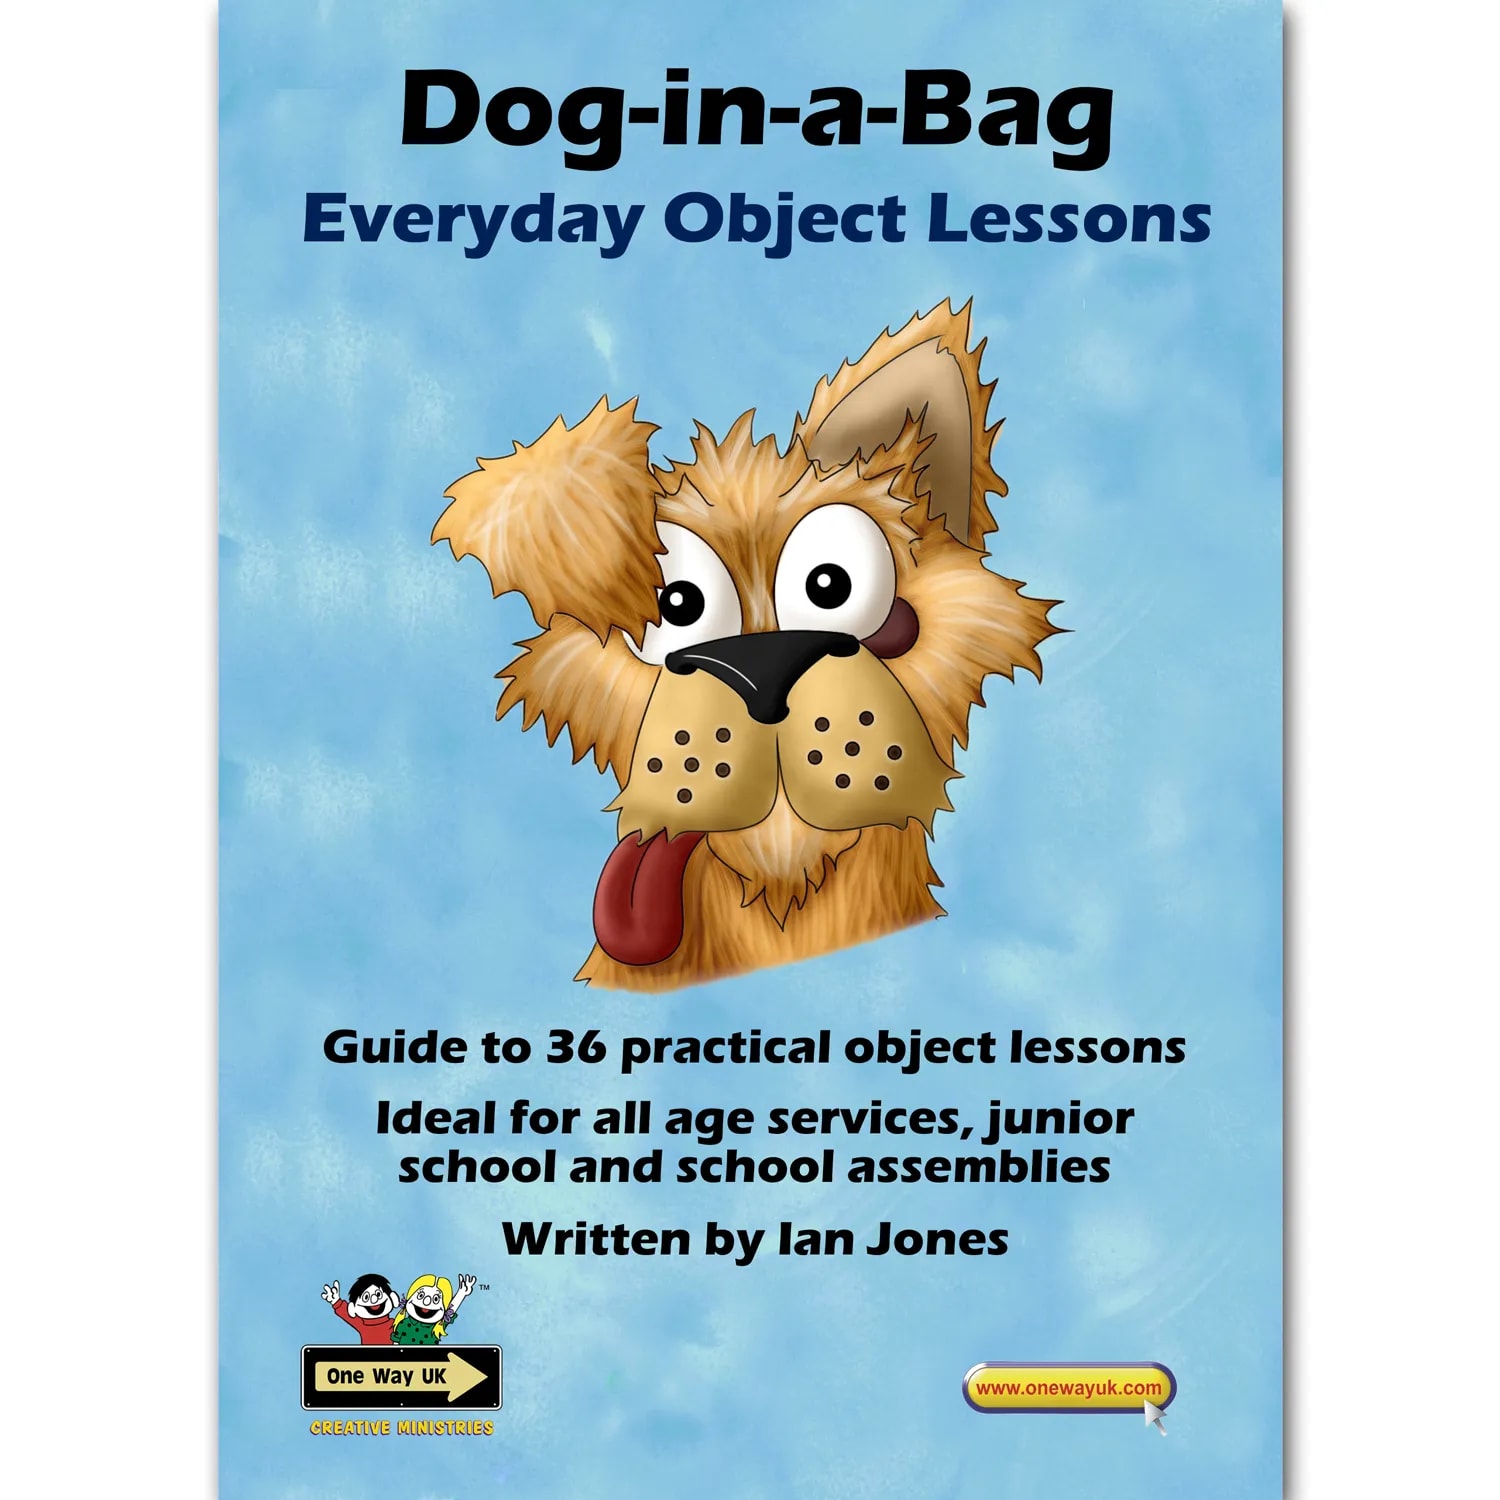 Everyday Dog in a Bag Object Lessons